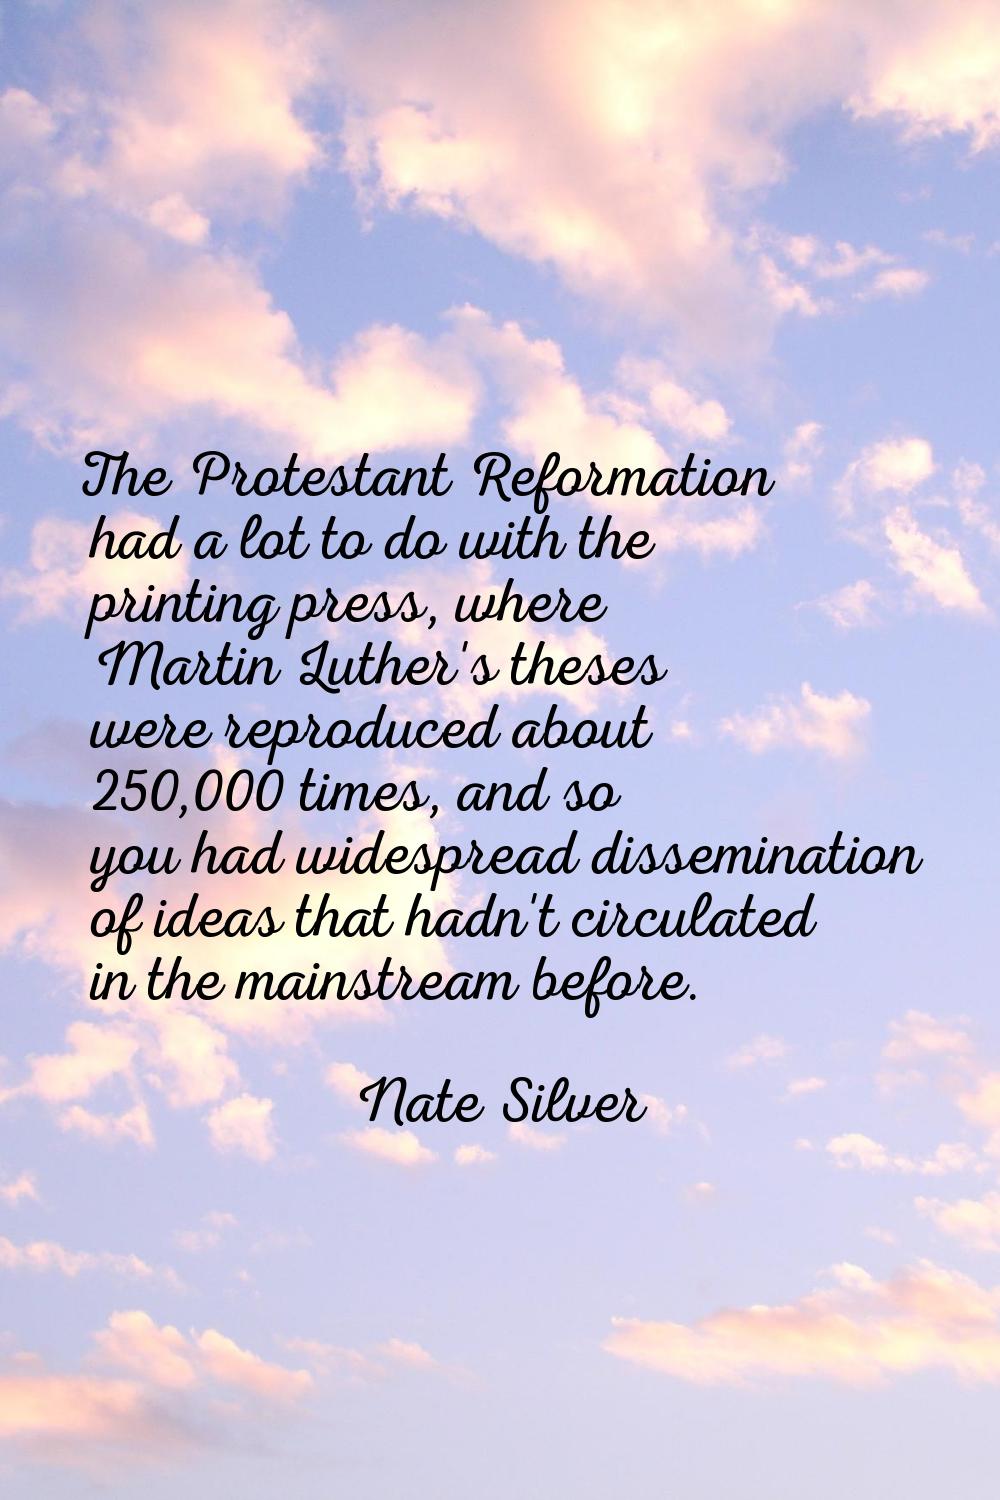 The Protestant Reformation had a lot to do with the printing press, where Martin Luther's theses we